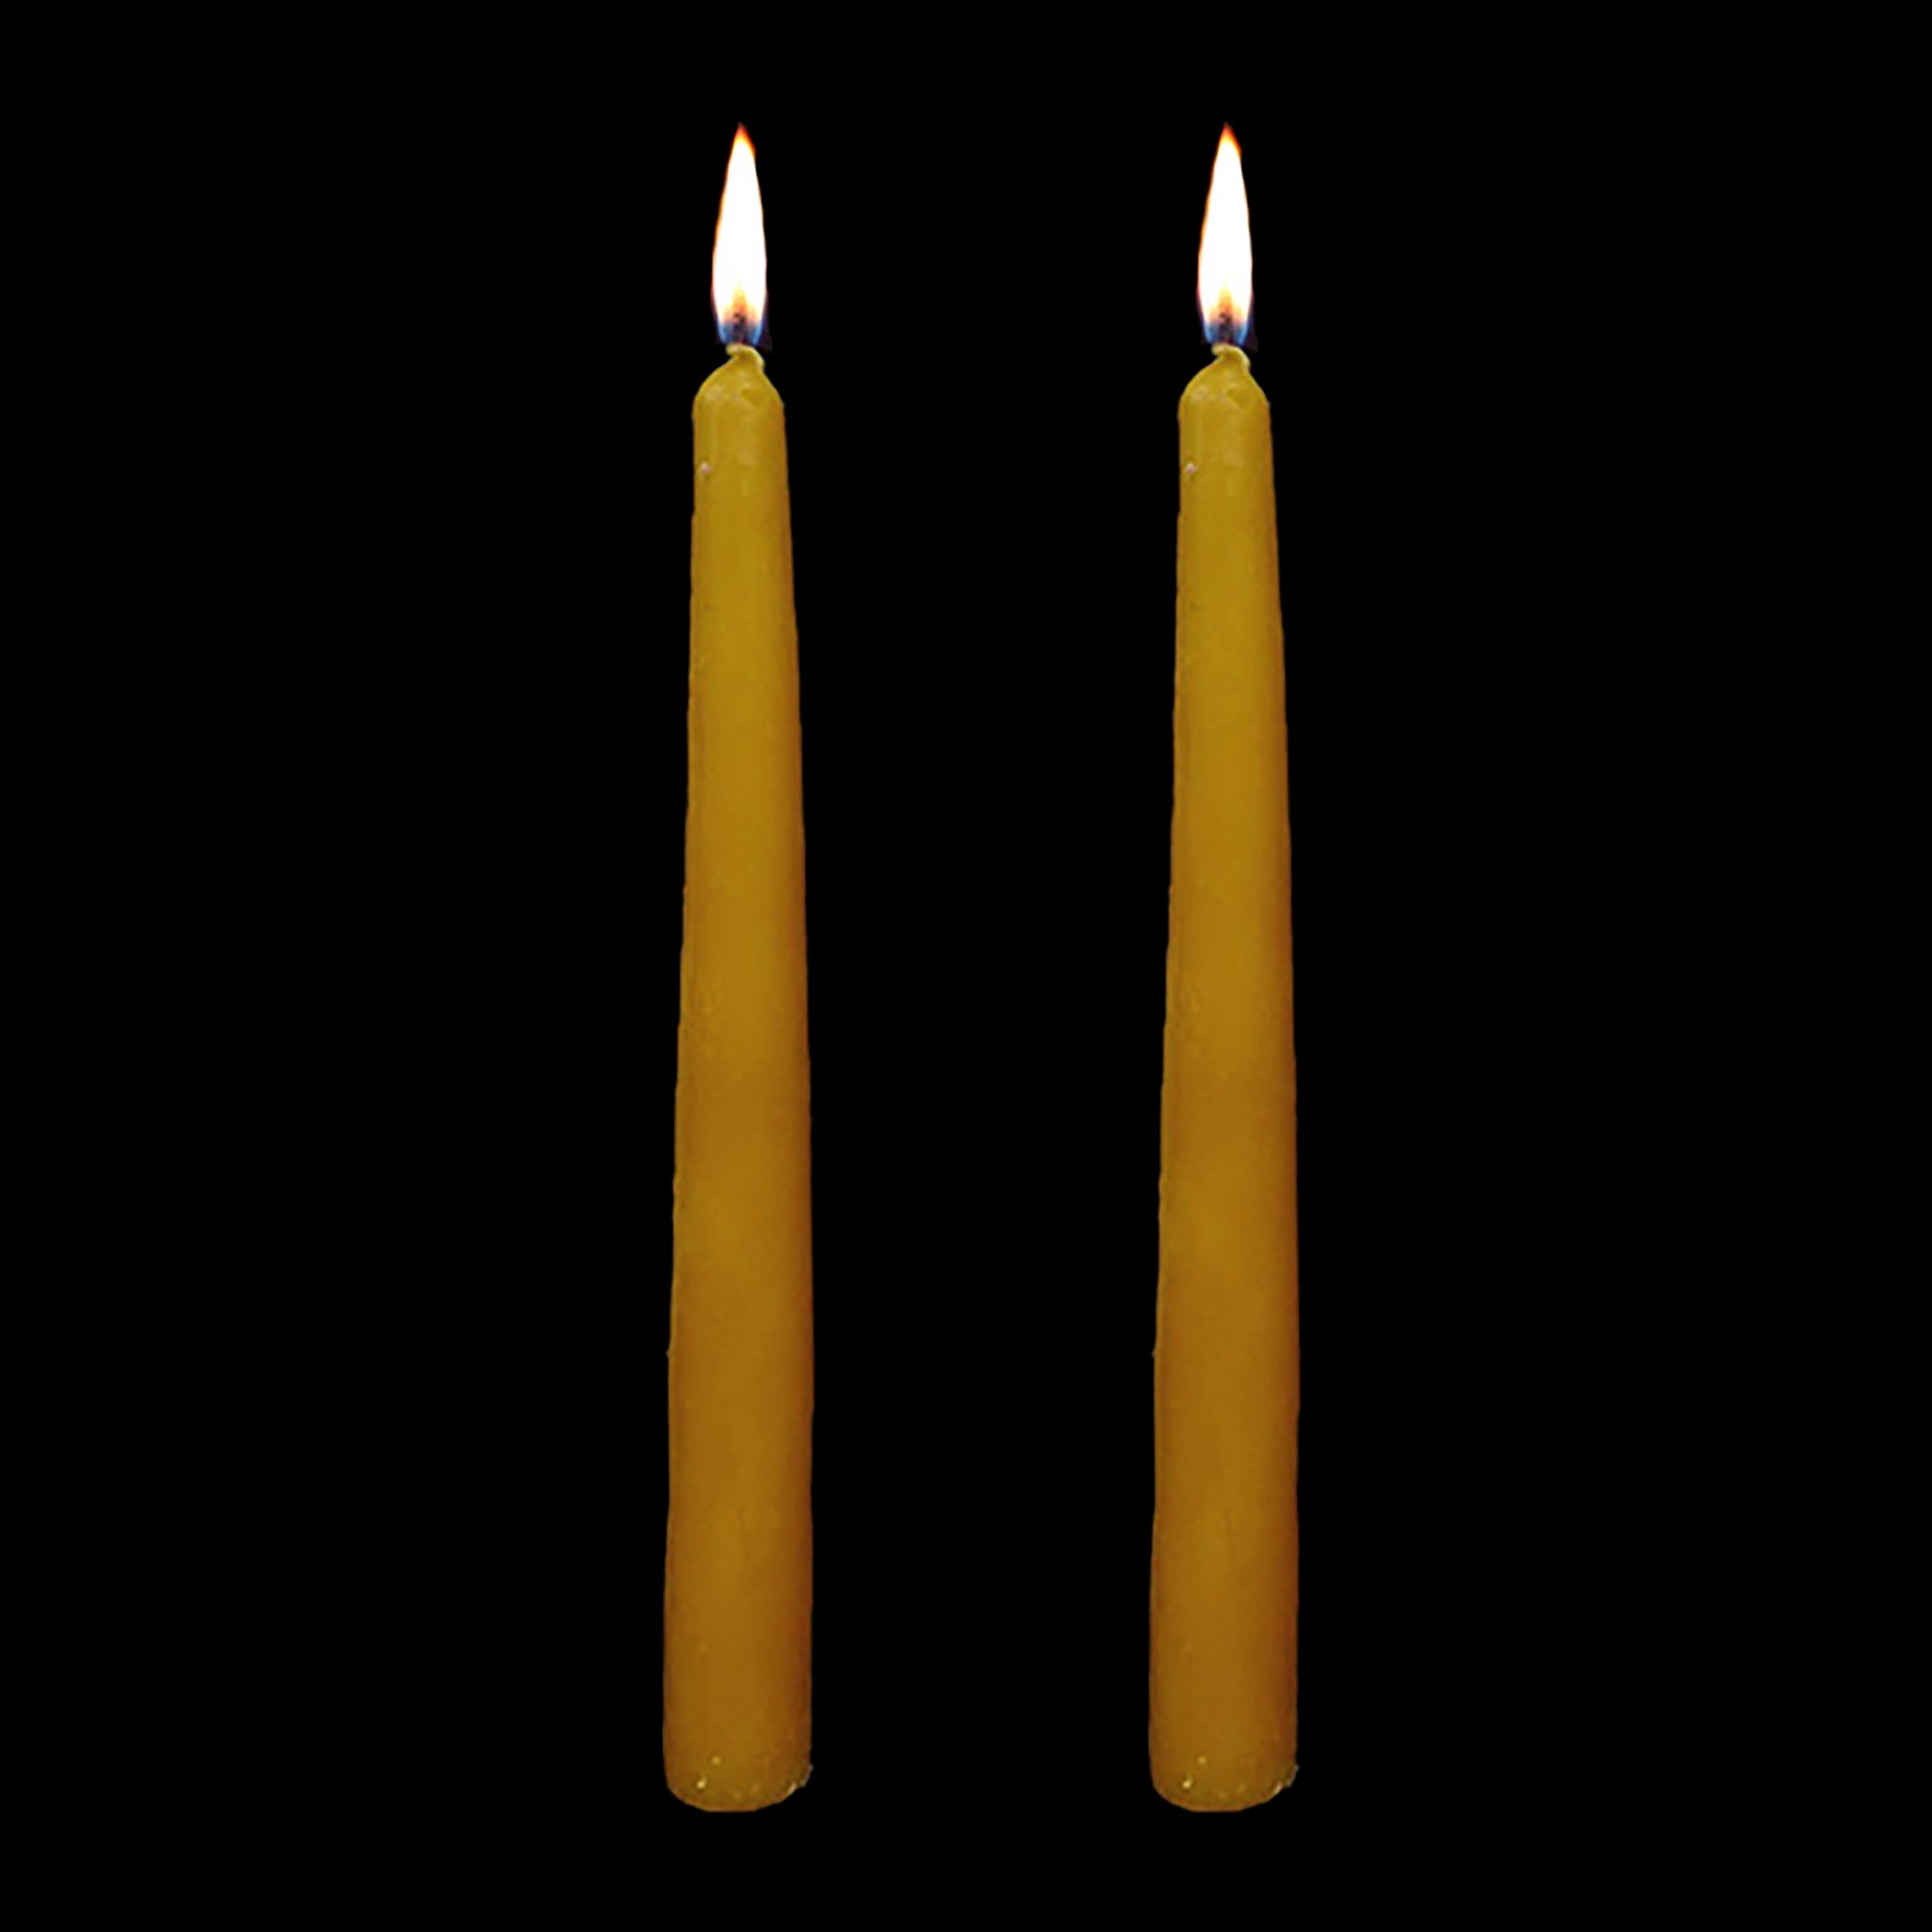 Large 100% Beeswax Candles x 2 - Lit